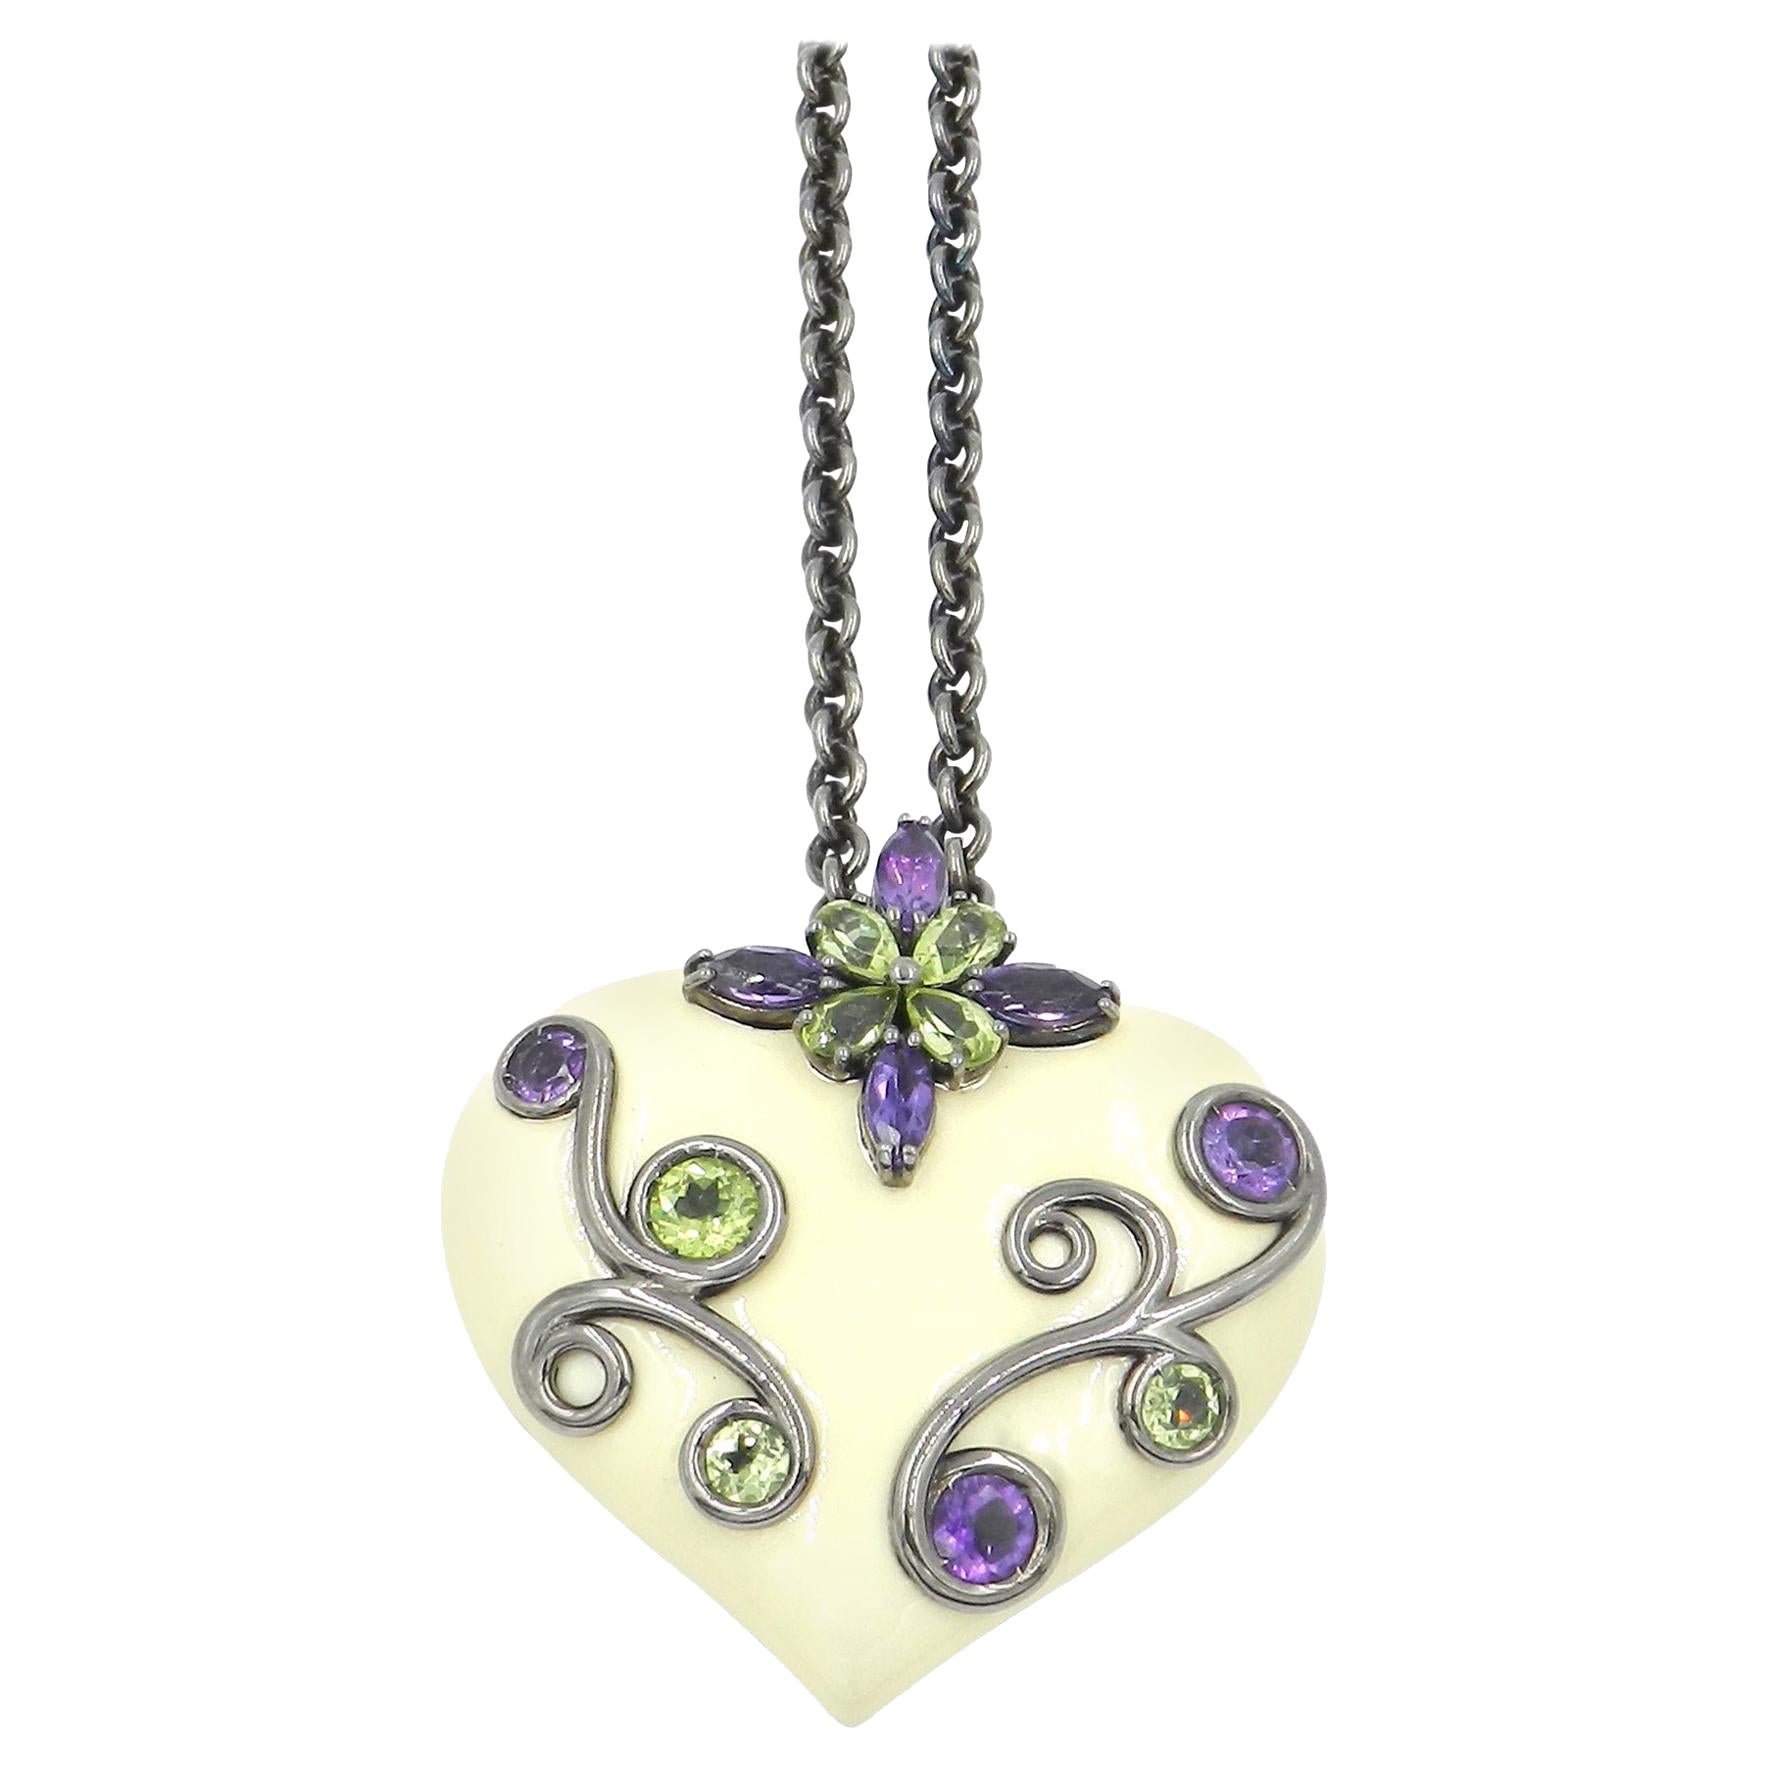 Silver Heart Pendant with White Enamel Amethyst and Peridot